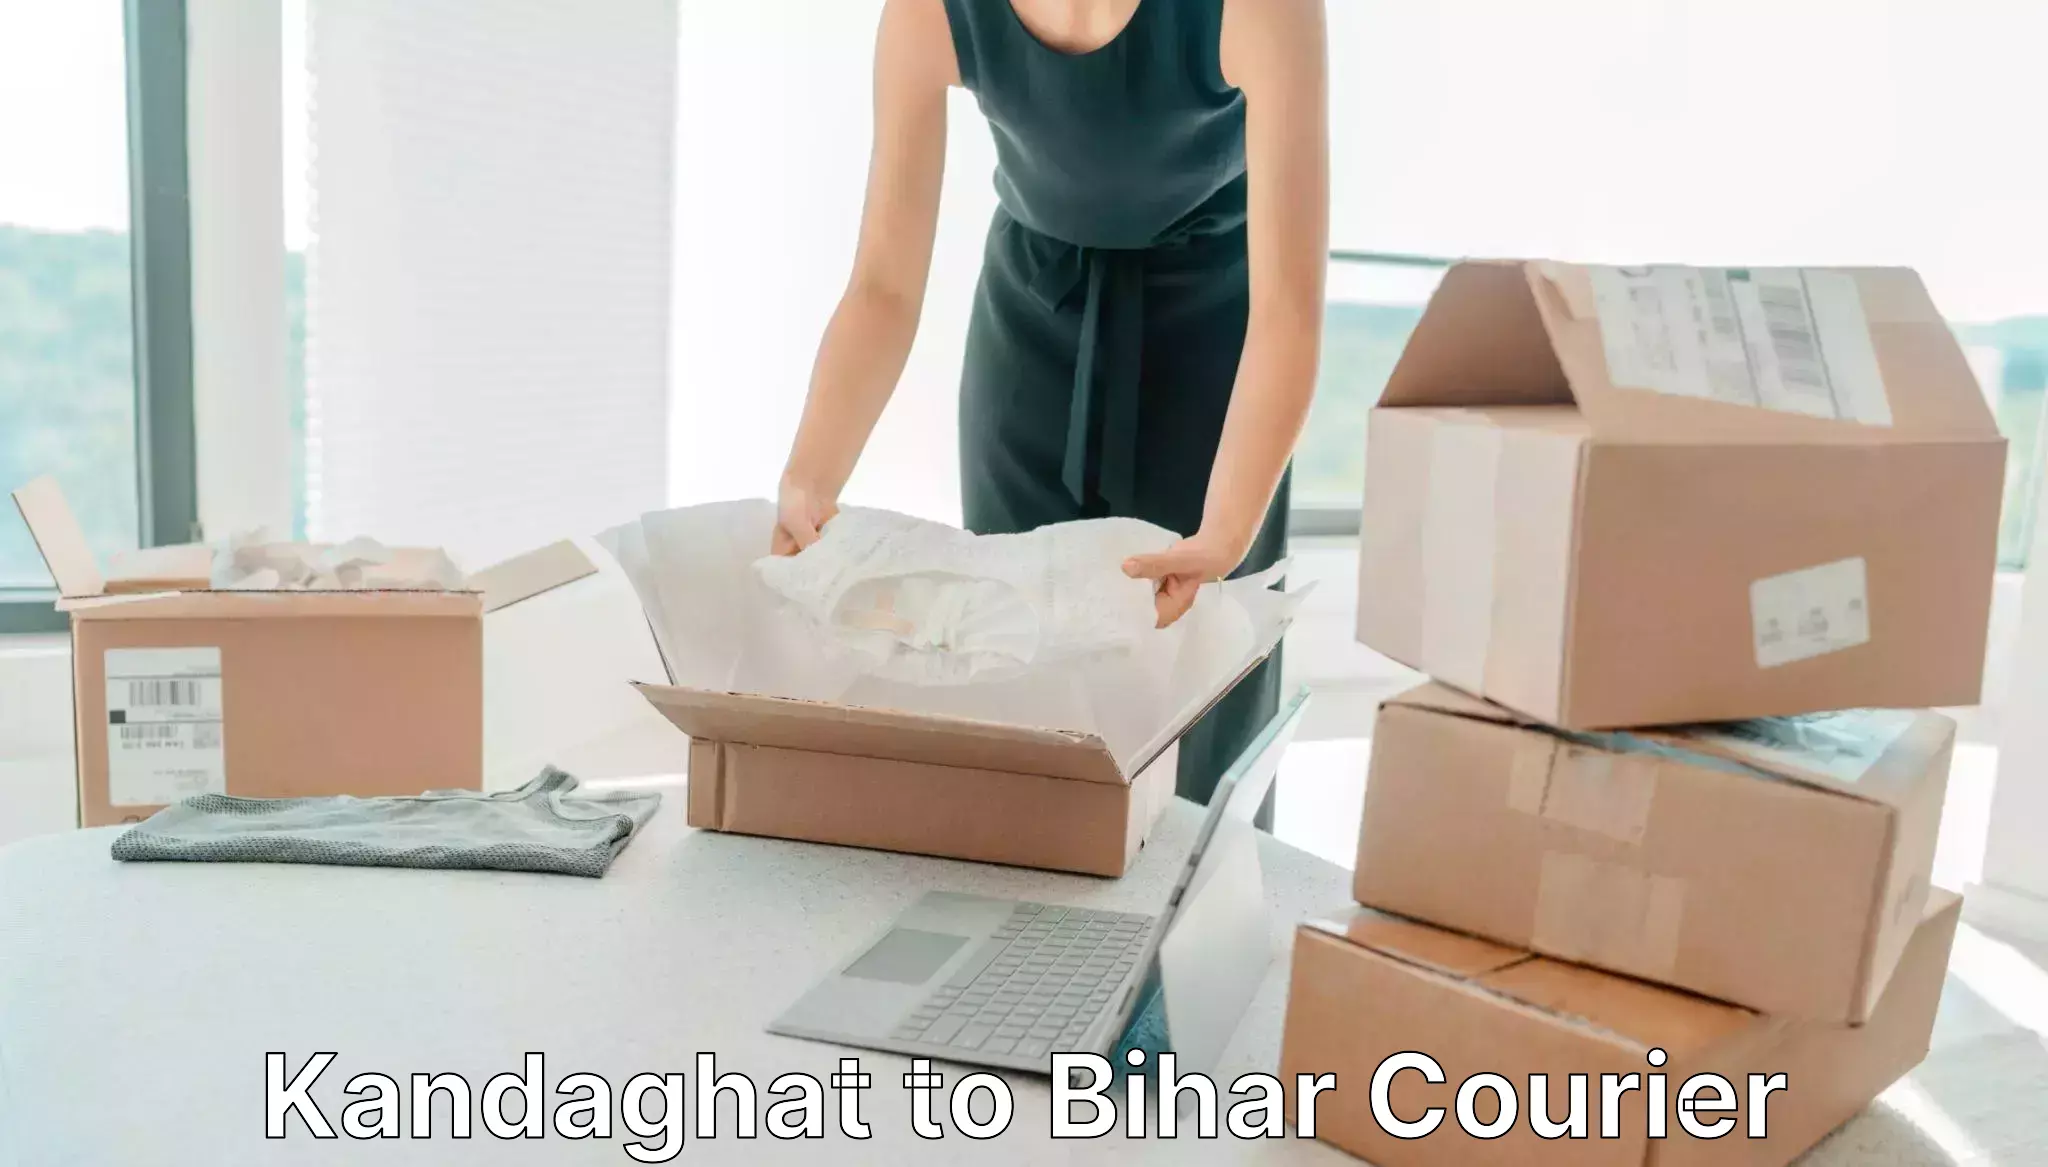 Courier service booking in Kandaghat to Jehanabad